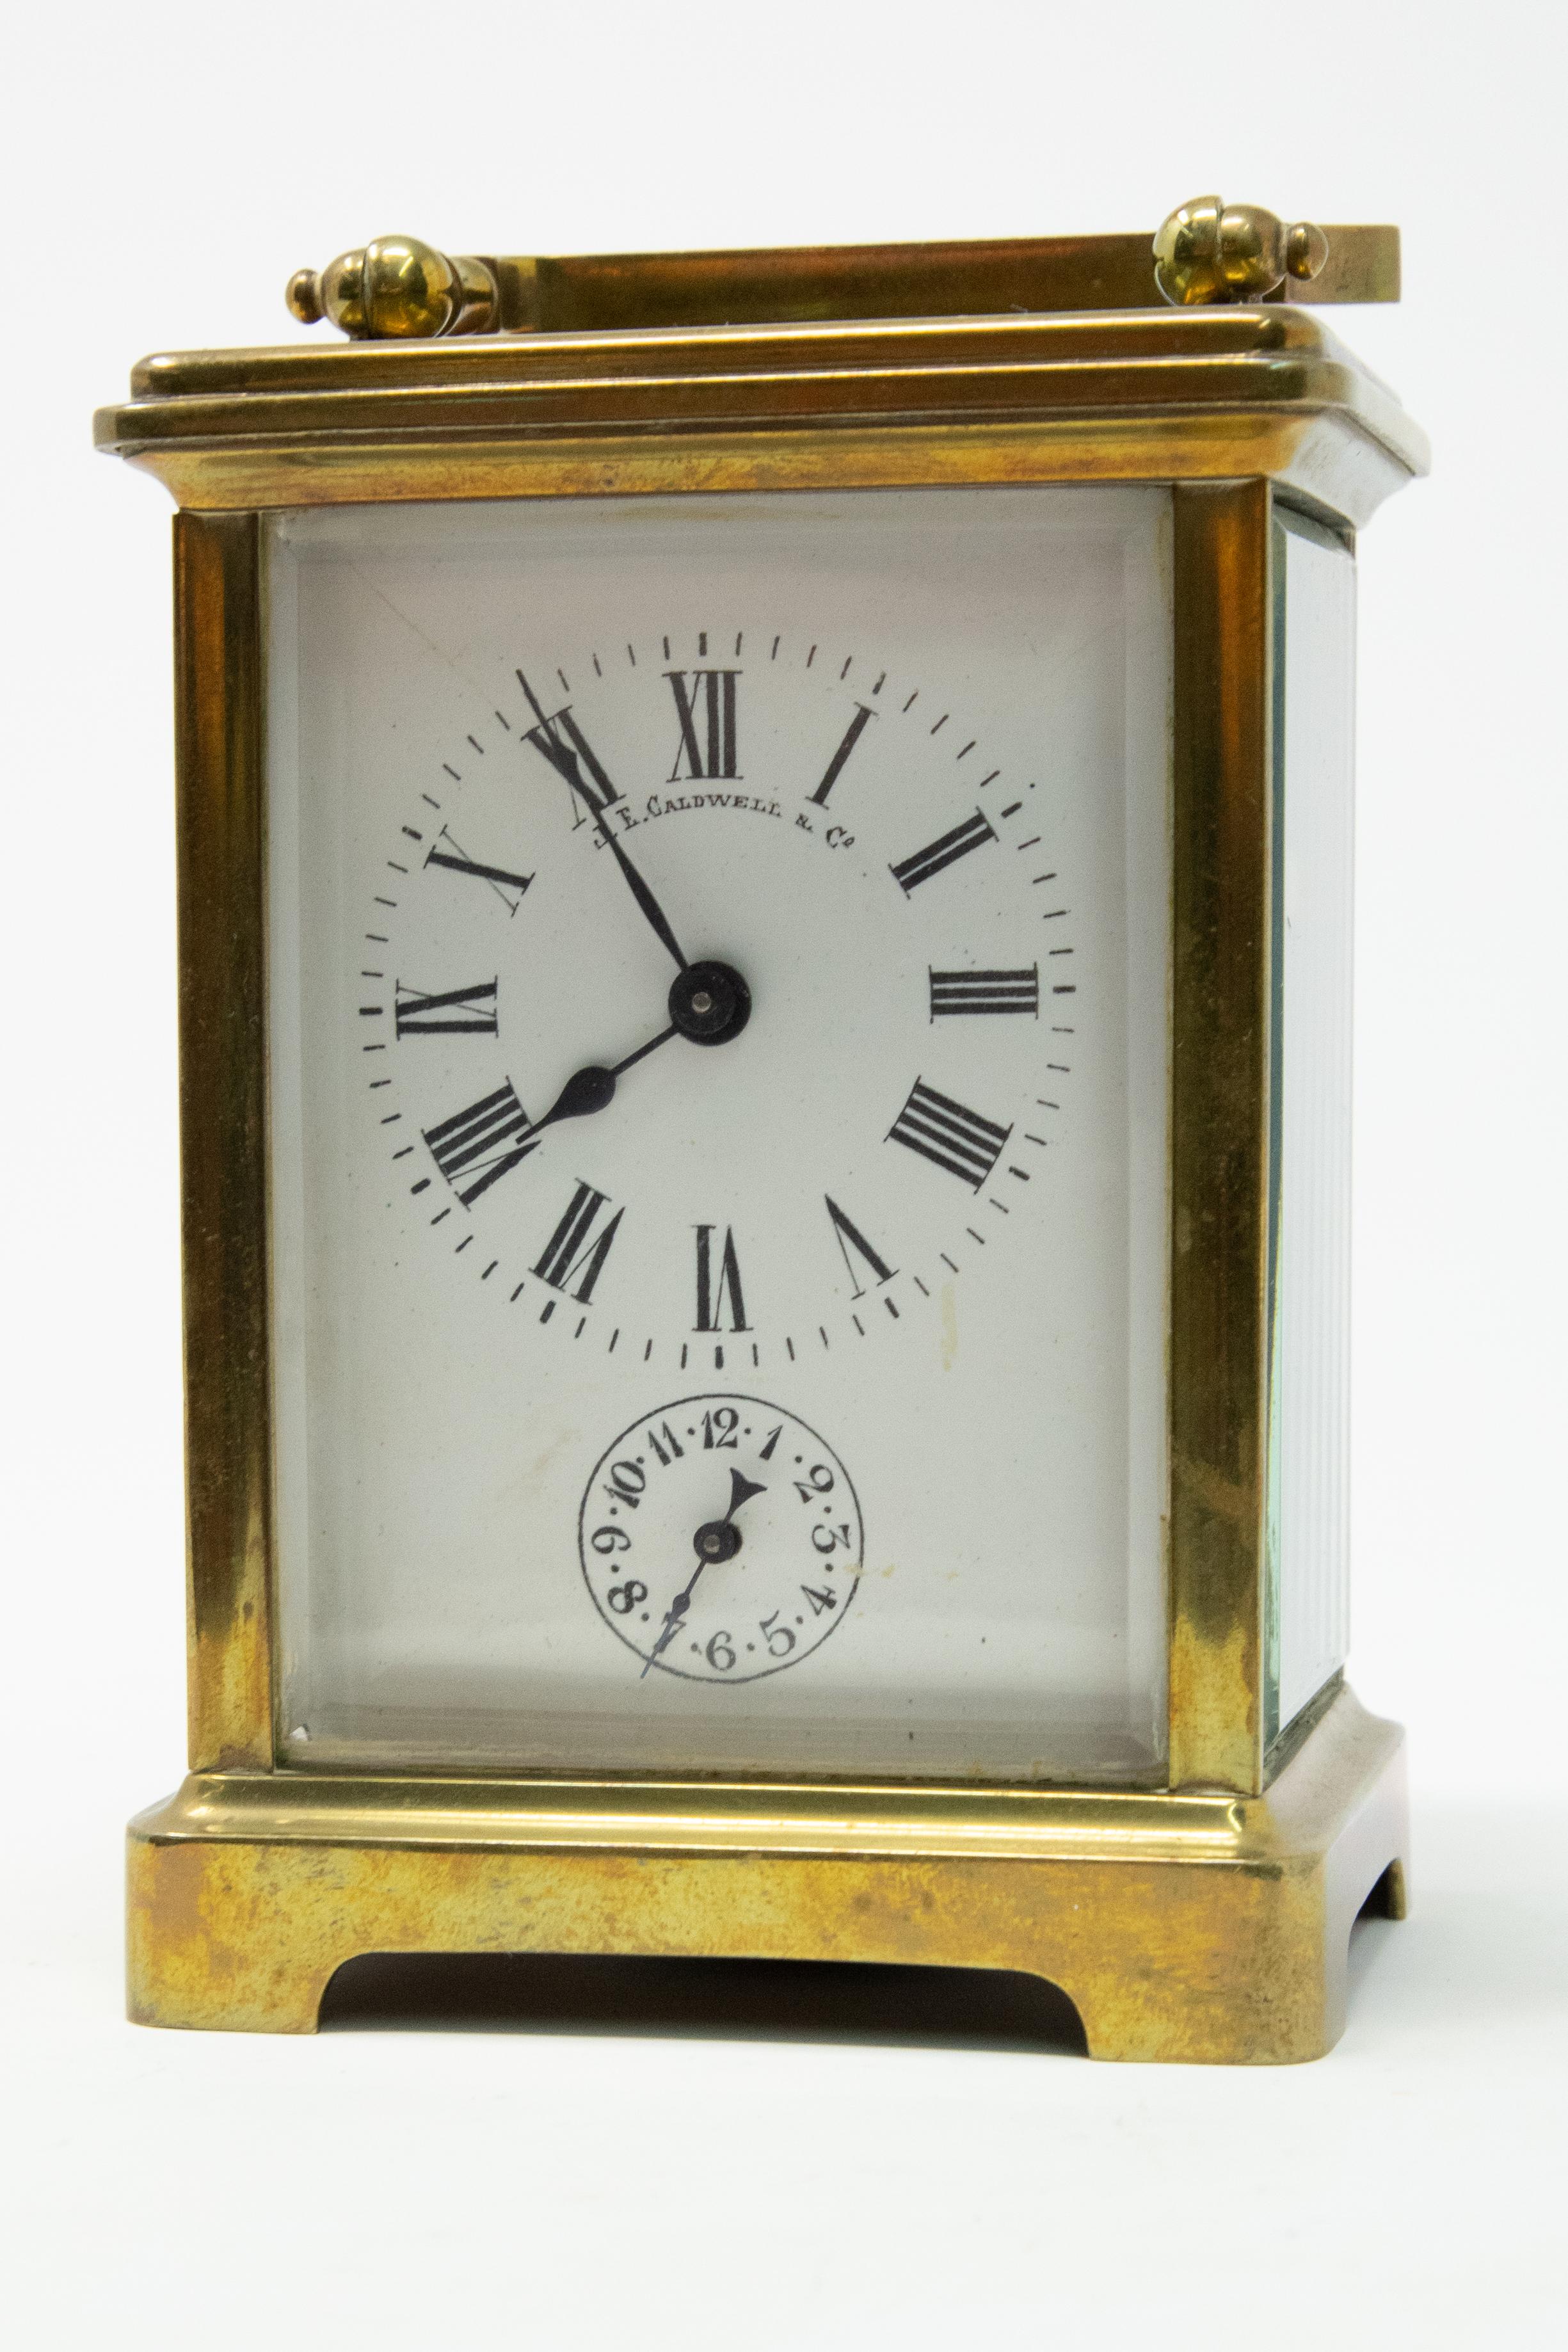 Offering this magnificent carriage clock by JE Caldwell & Co. stands on a bracketed foot with beveled glass all around. The clock face is simple black and white. The key is with the clock, it does wind up and work. Keeps time pretty accurately. Also